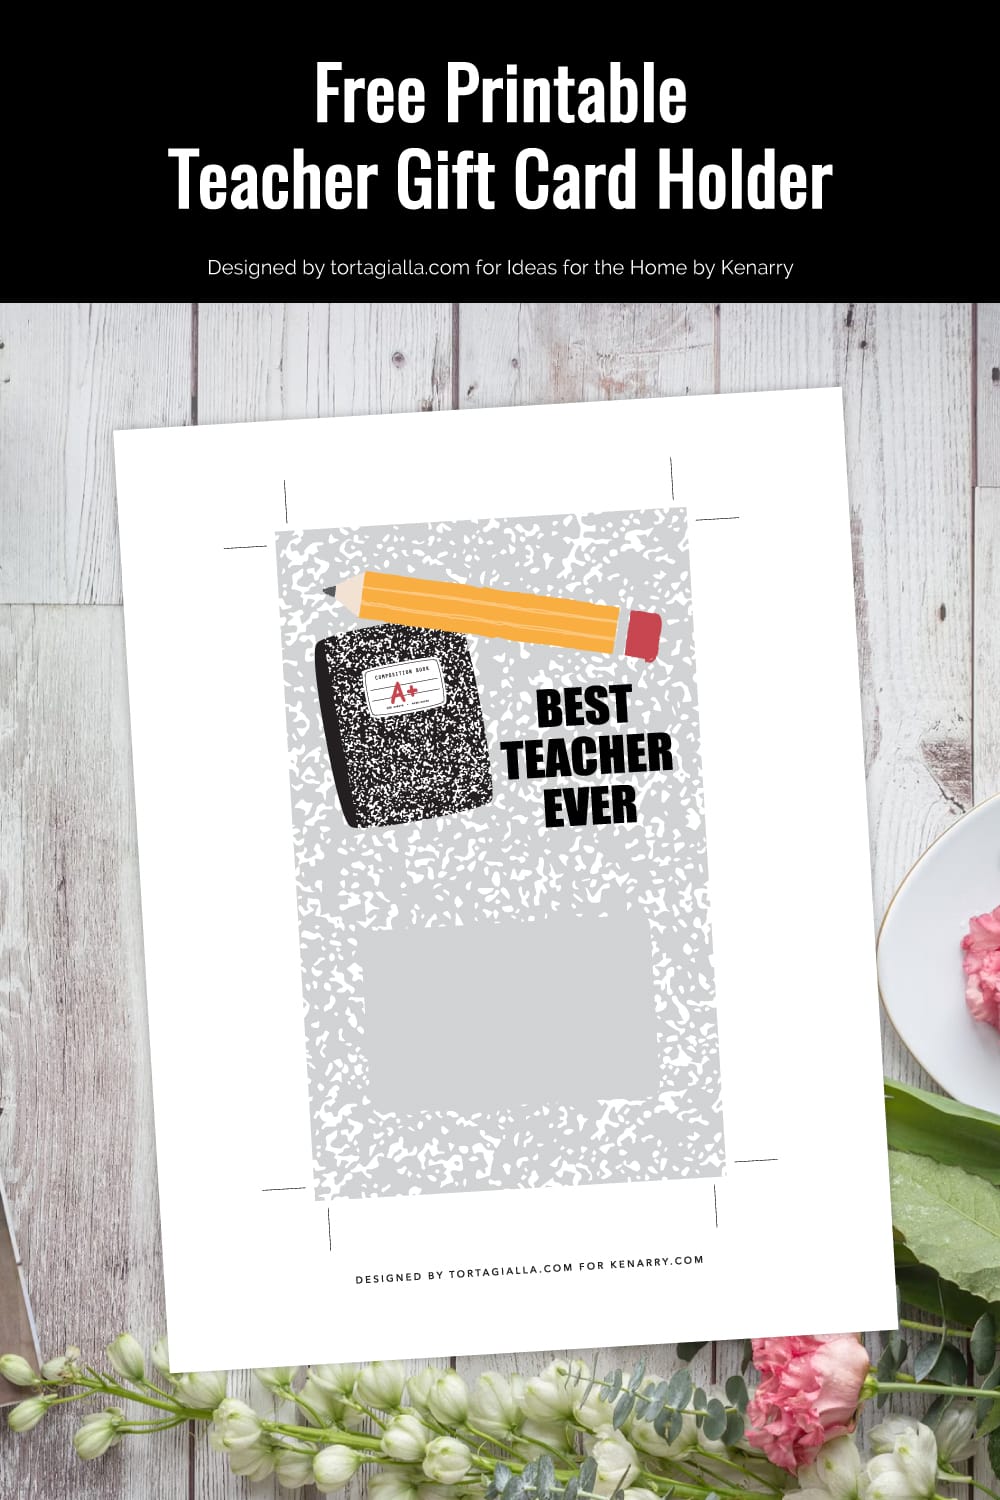 Preview of printable gift card holder for teachers on top of wooden plank background with white and pink flowers and foilage on the lower right corner.